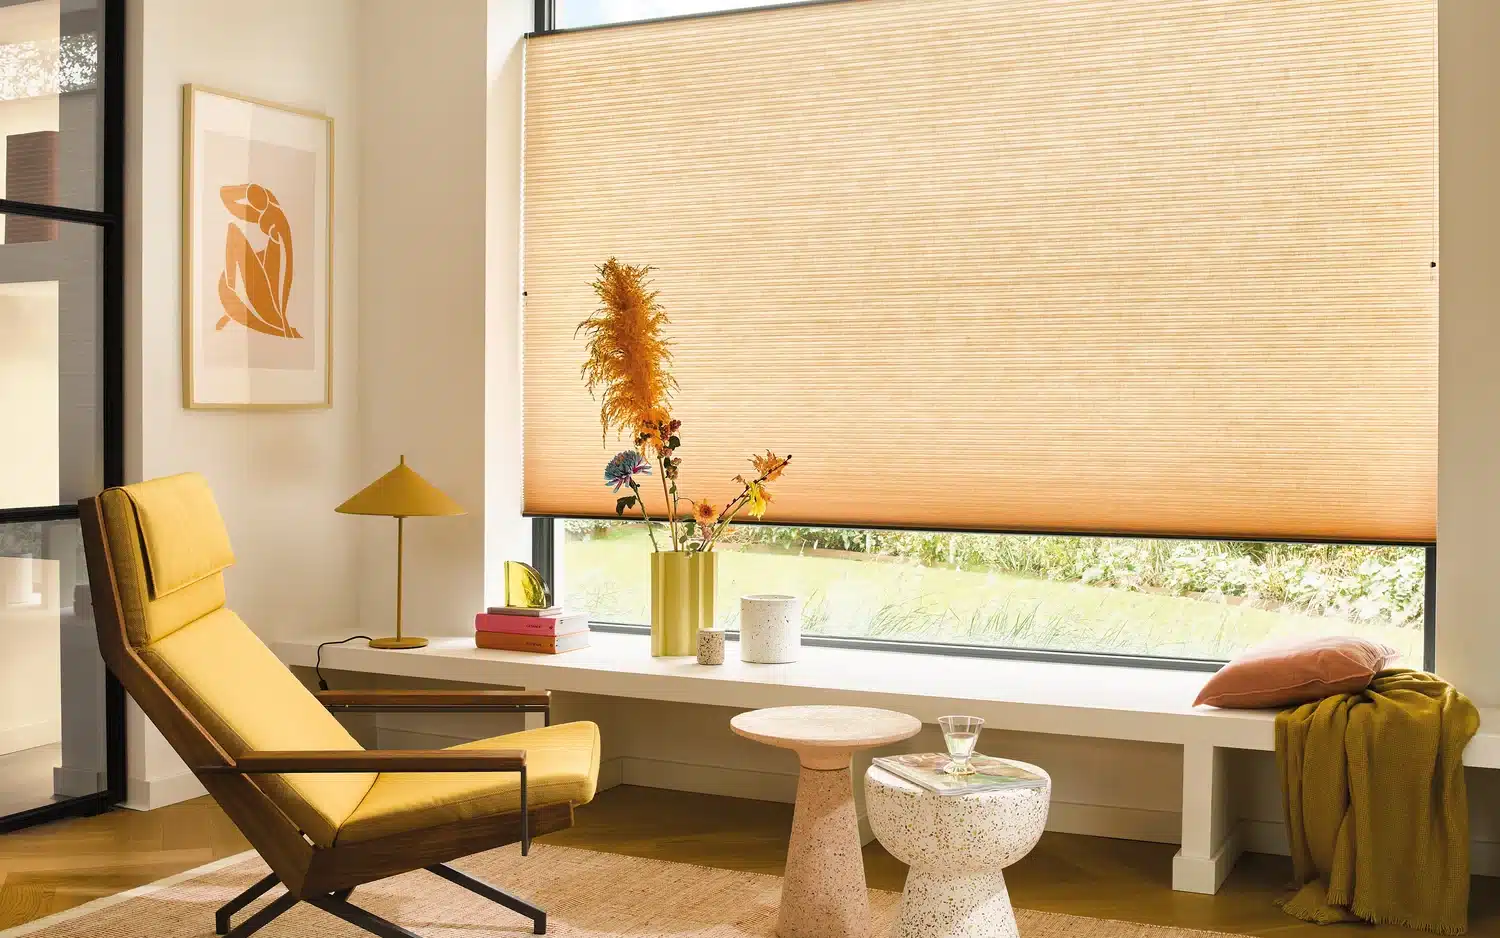 Luxaflex Orange Duette Shades in a modern and contemporary living room.